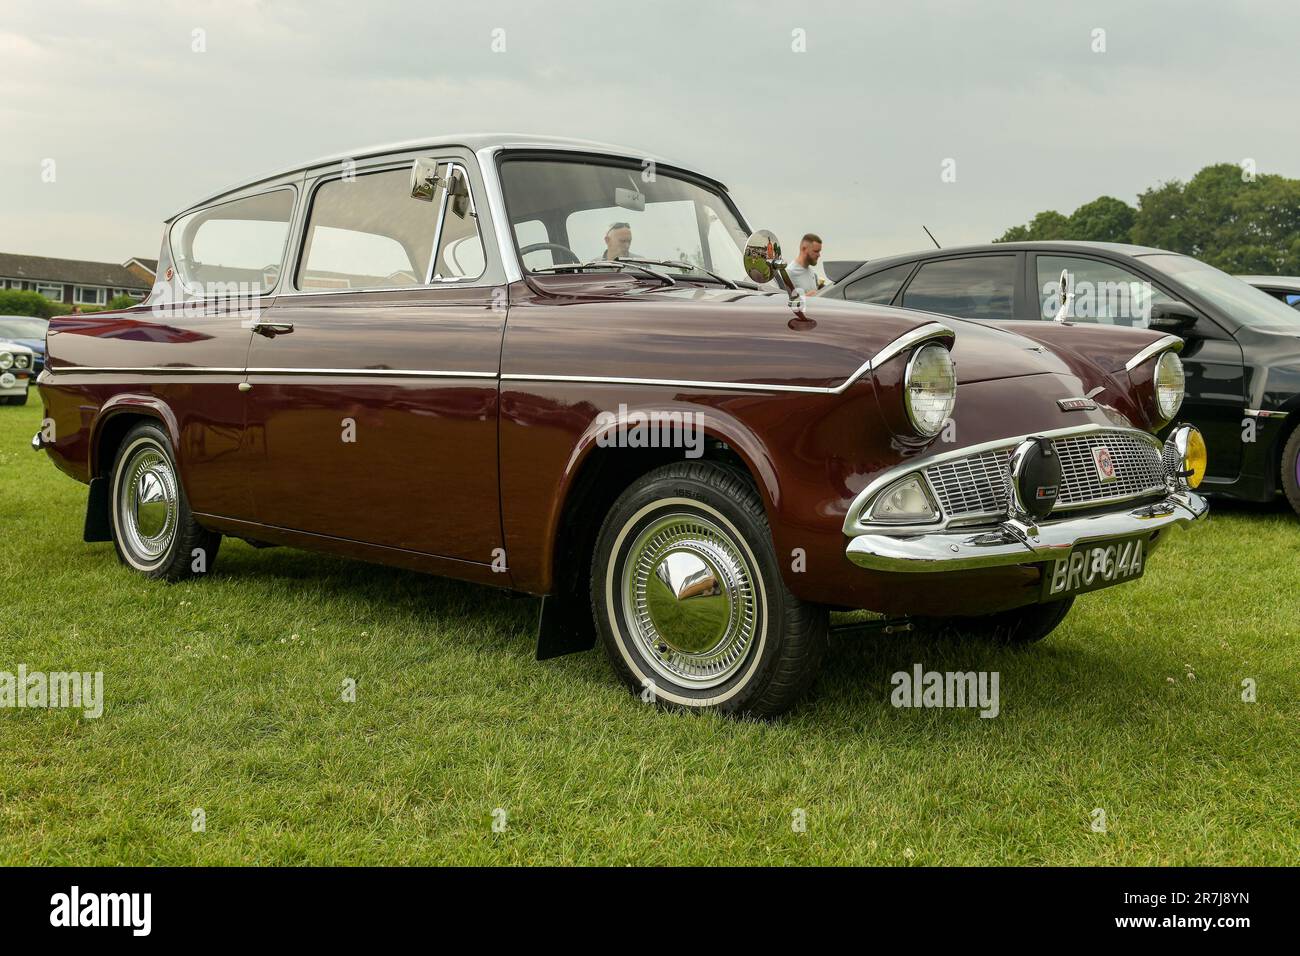 Ford Anglia Banque D'Images